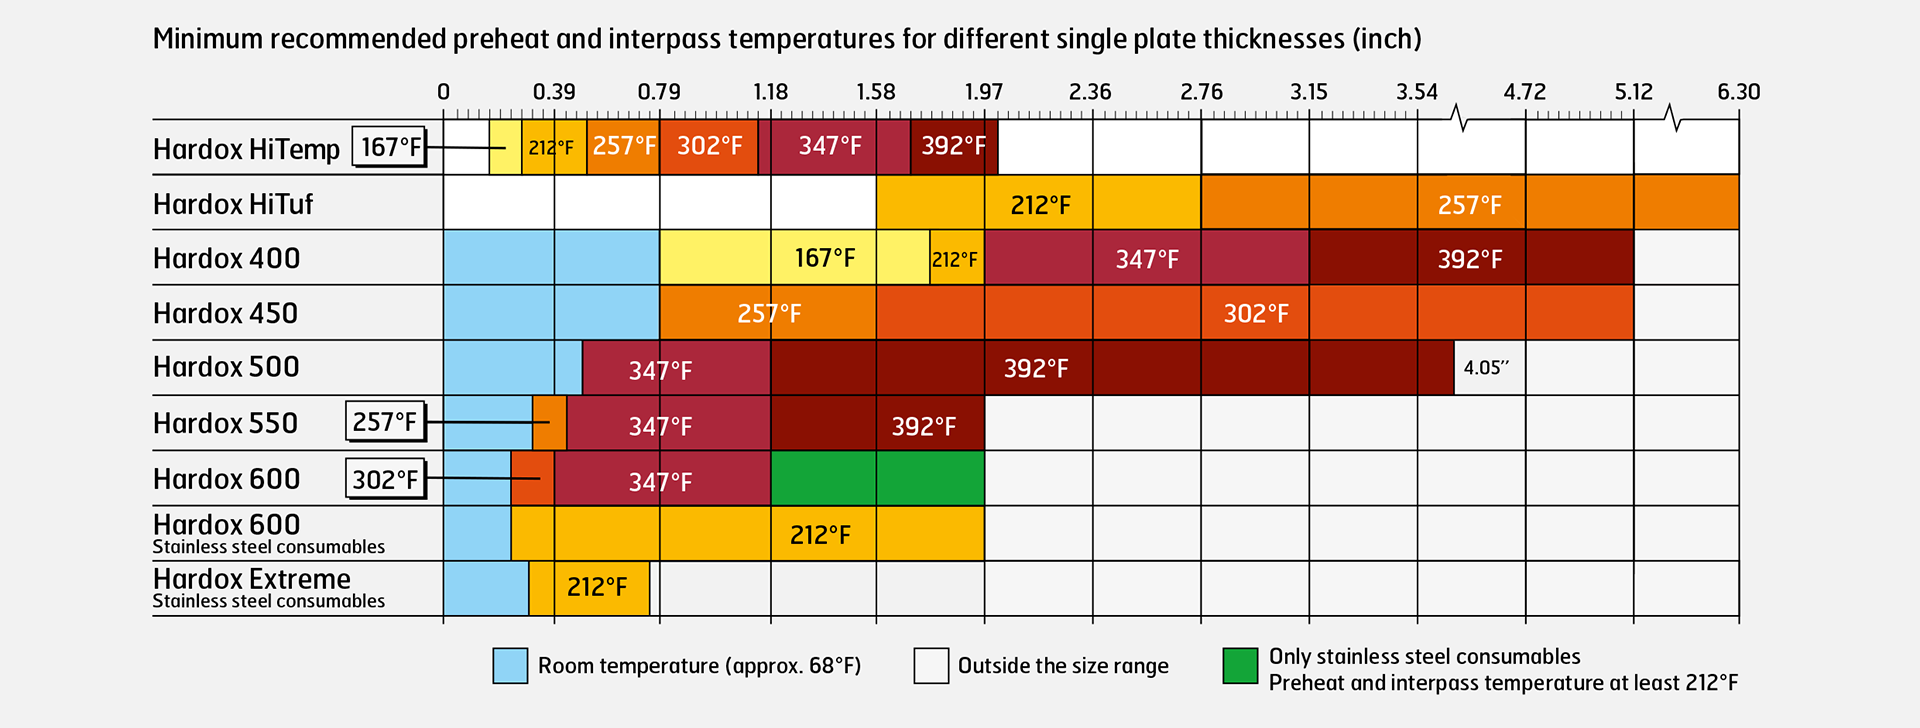 Recommended preheating temperatures